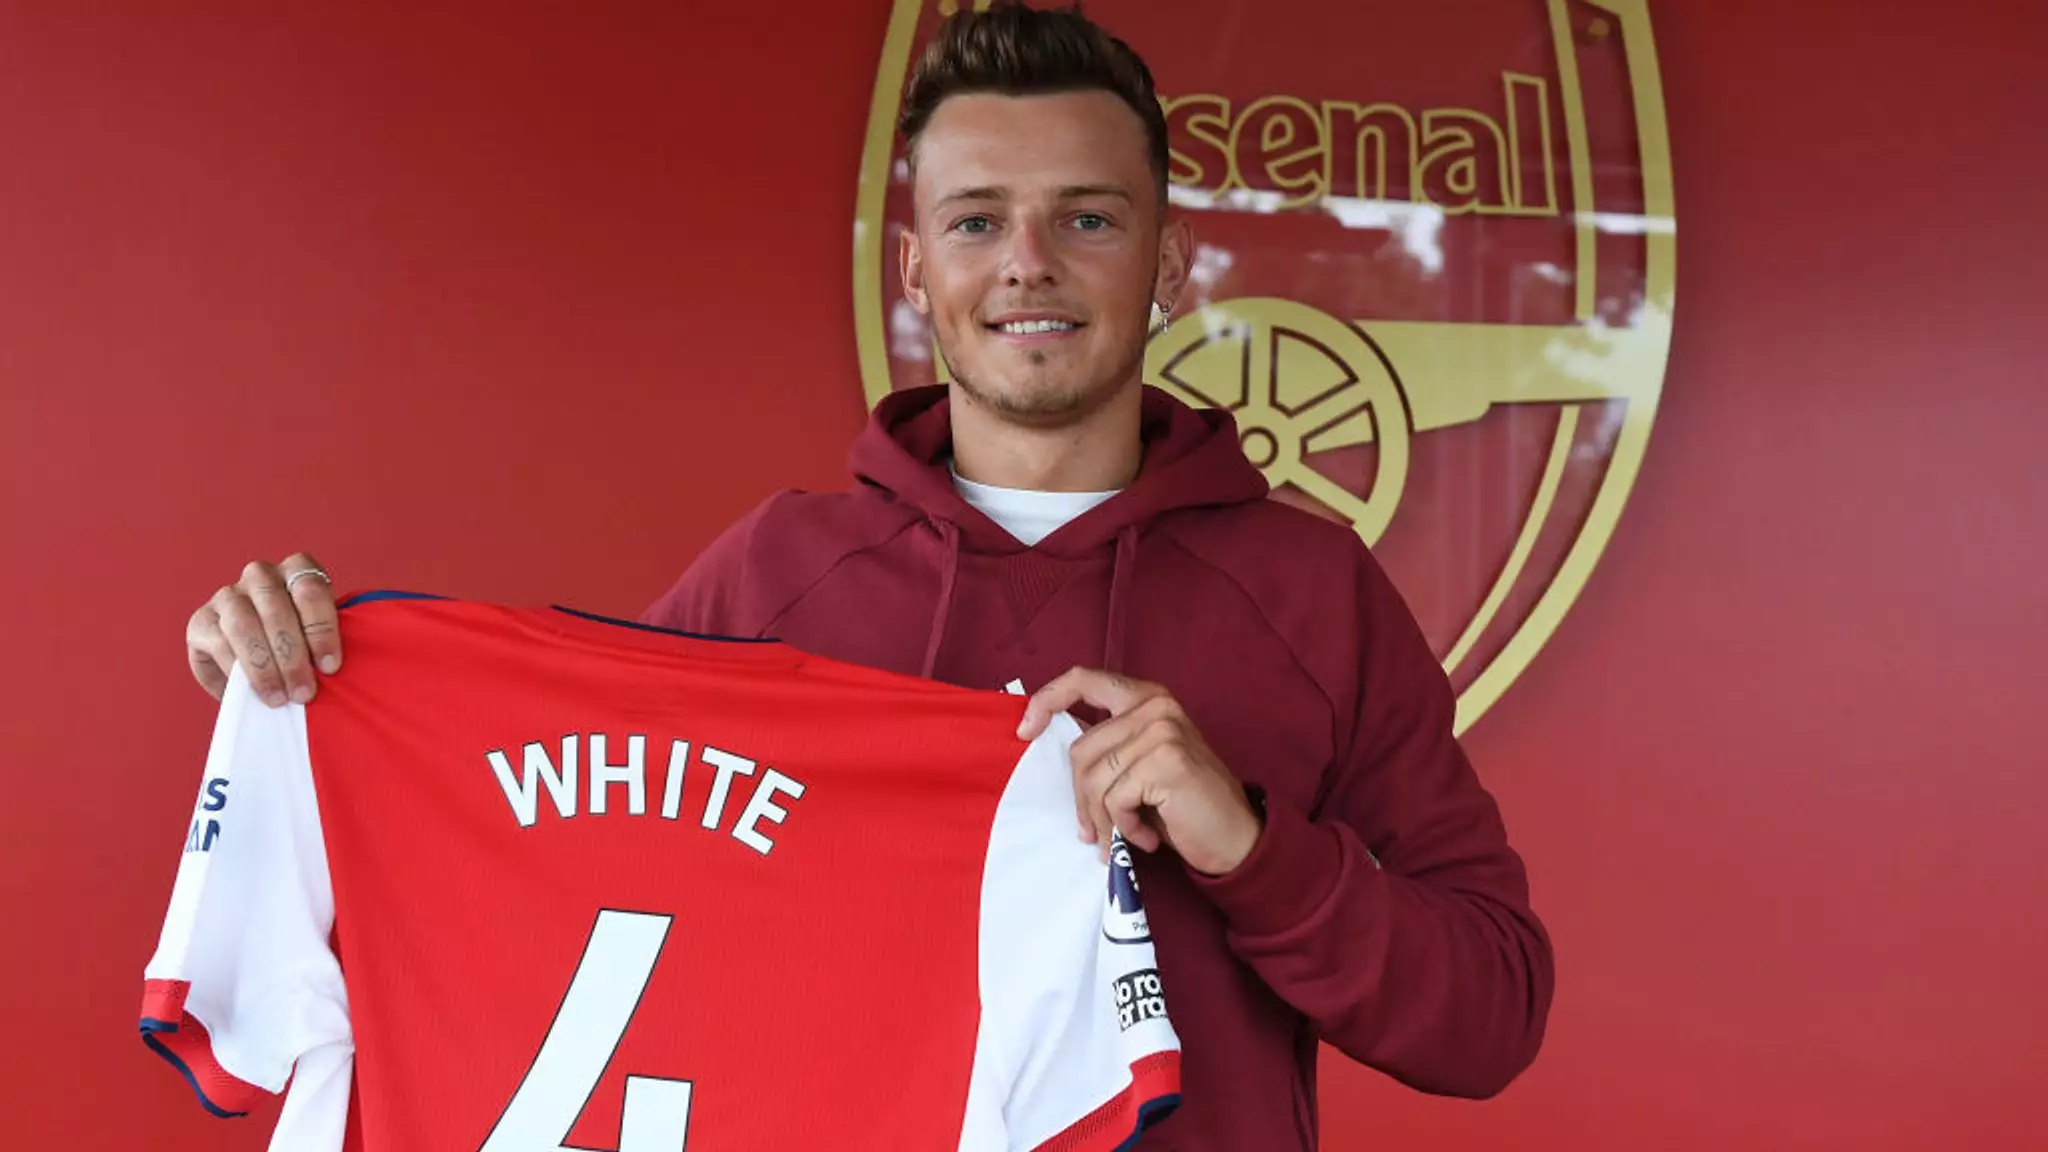 Arsenal completed the signing of Ben White from Brighton & Hove Albion earlier this month